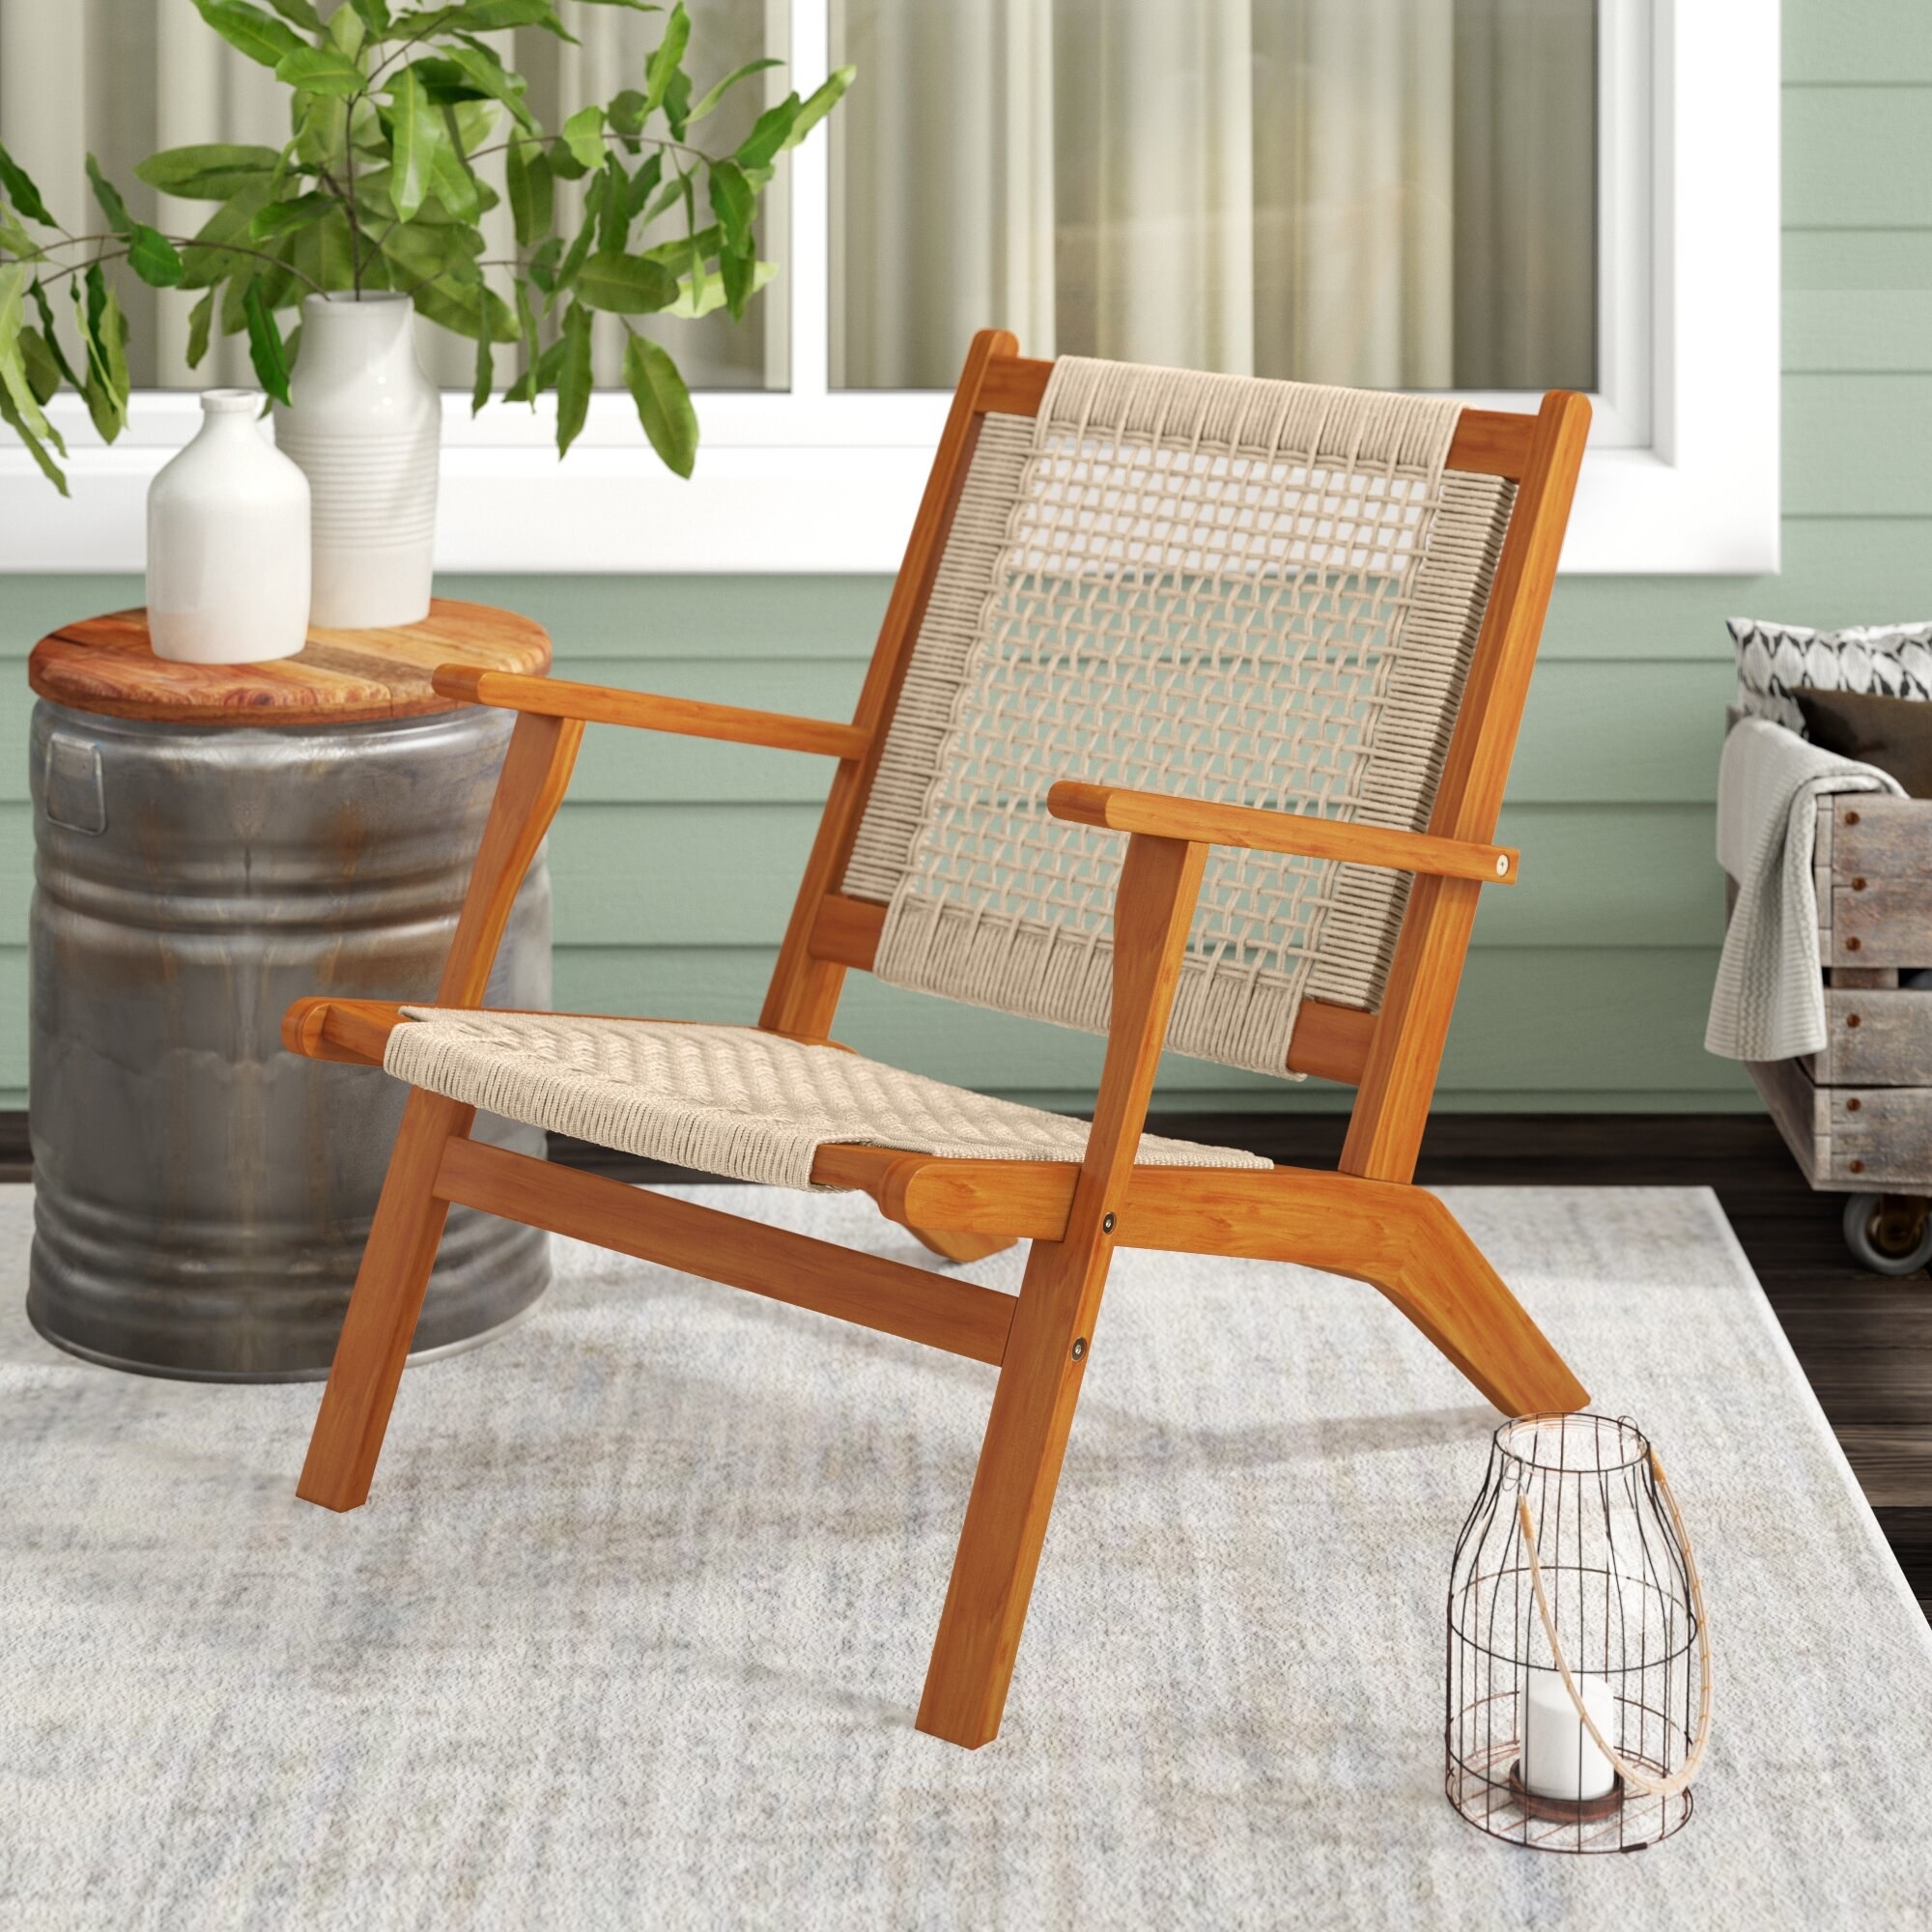 Wicker chair on house patio